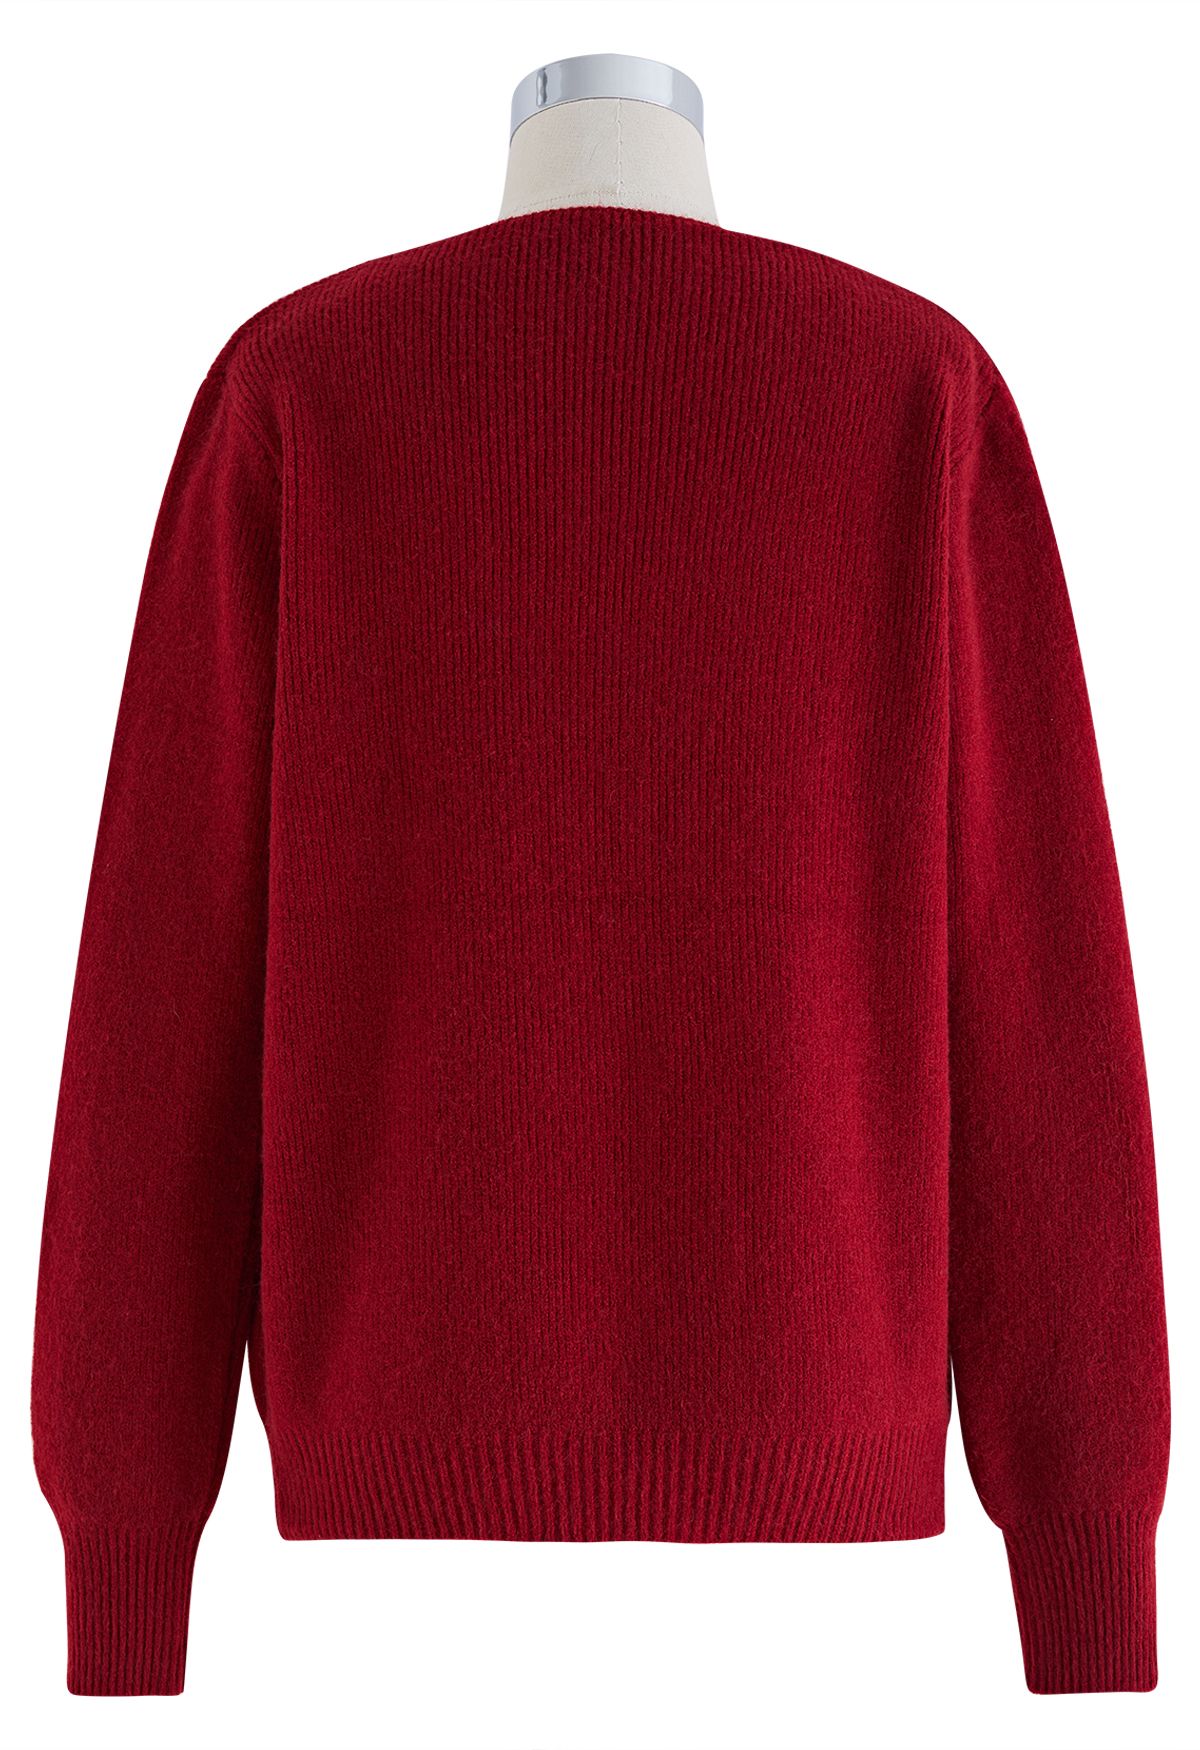 Cutout Pearl Neckline Knit Sweater in Red - Retro, Indie and Unique Fashion